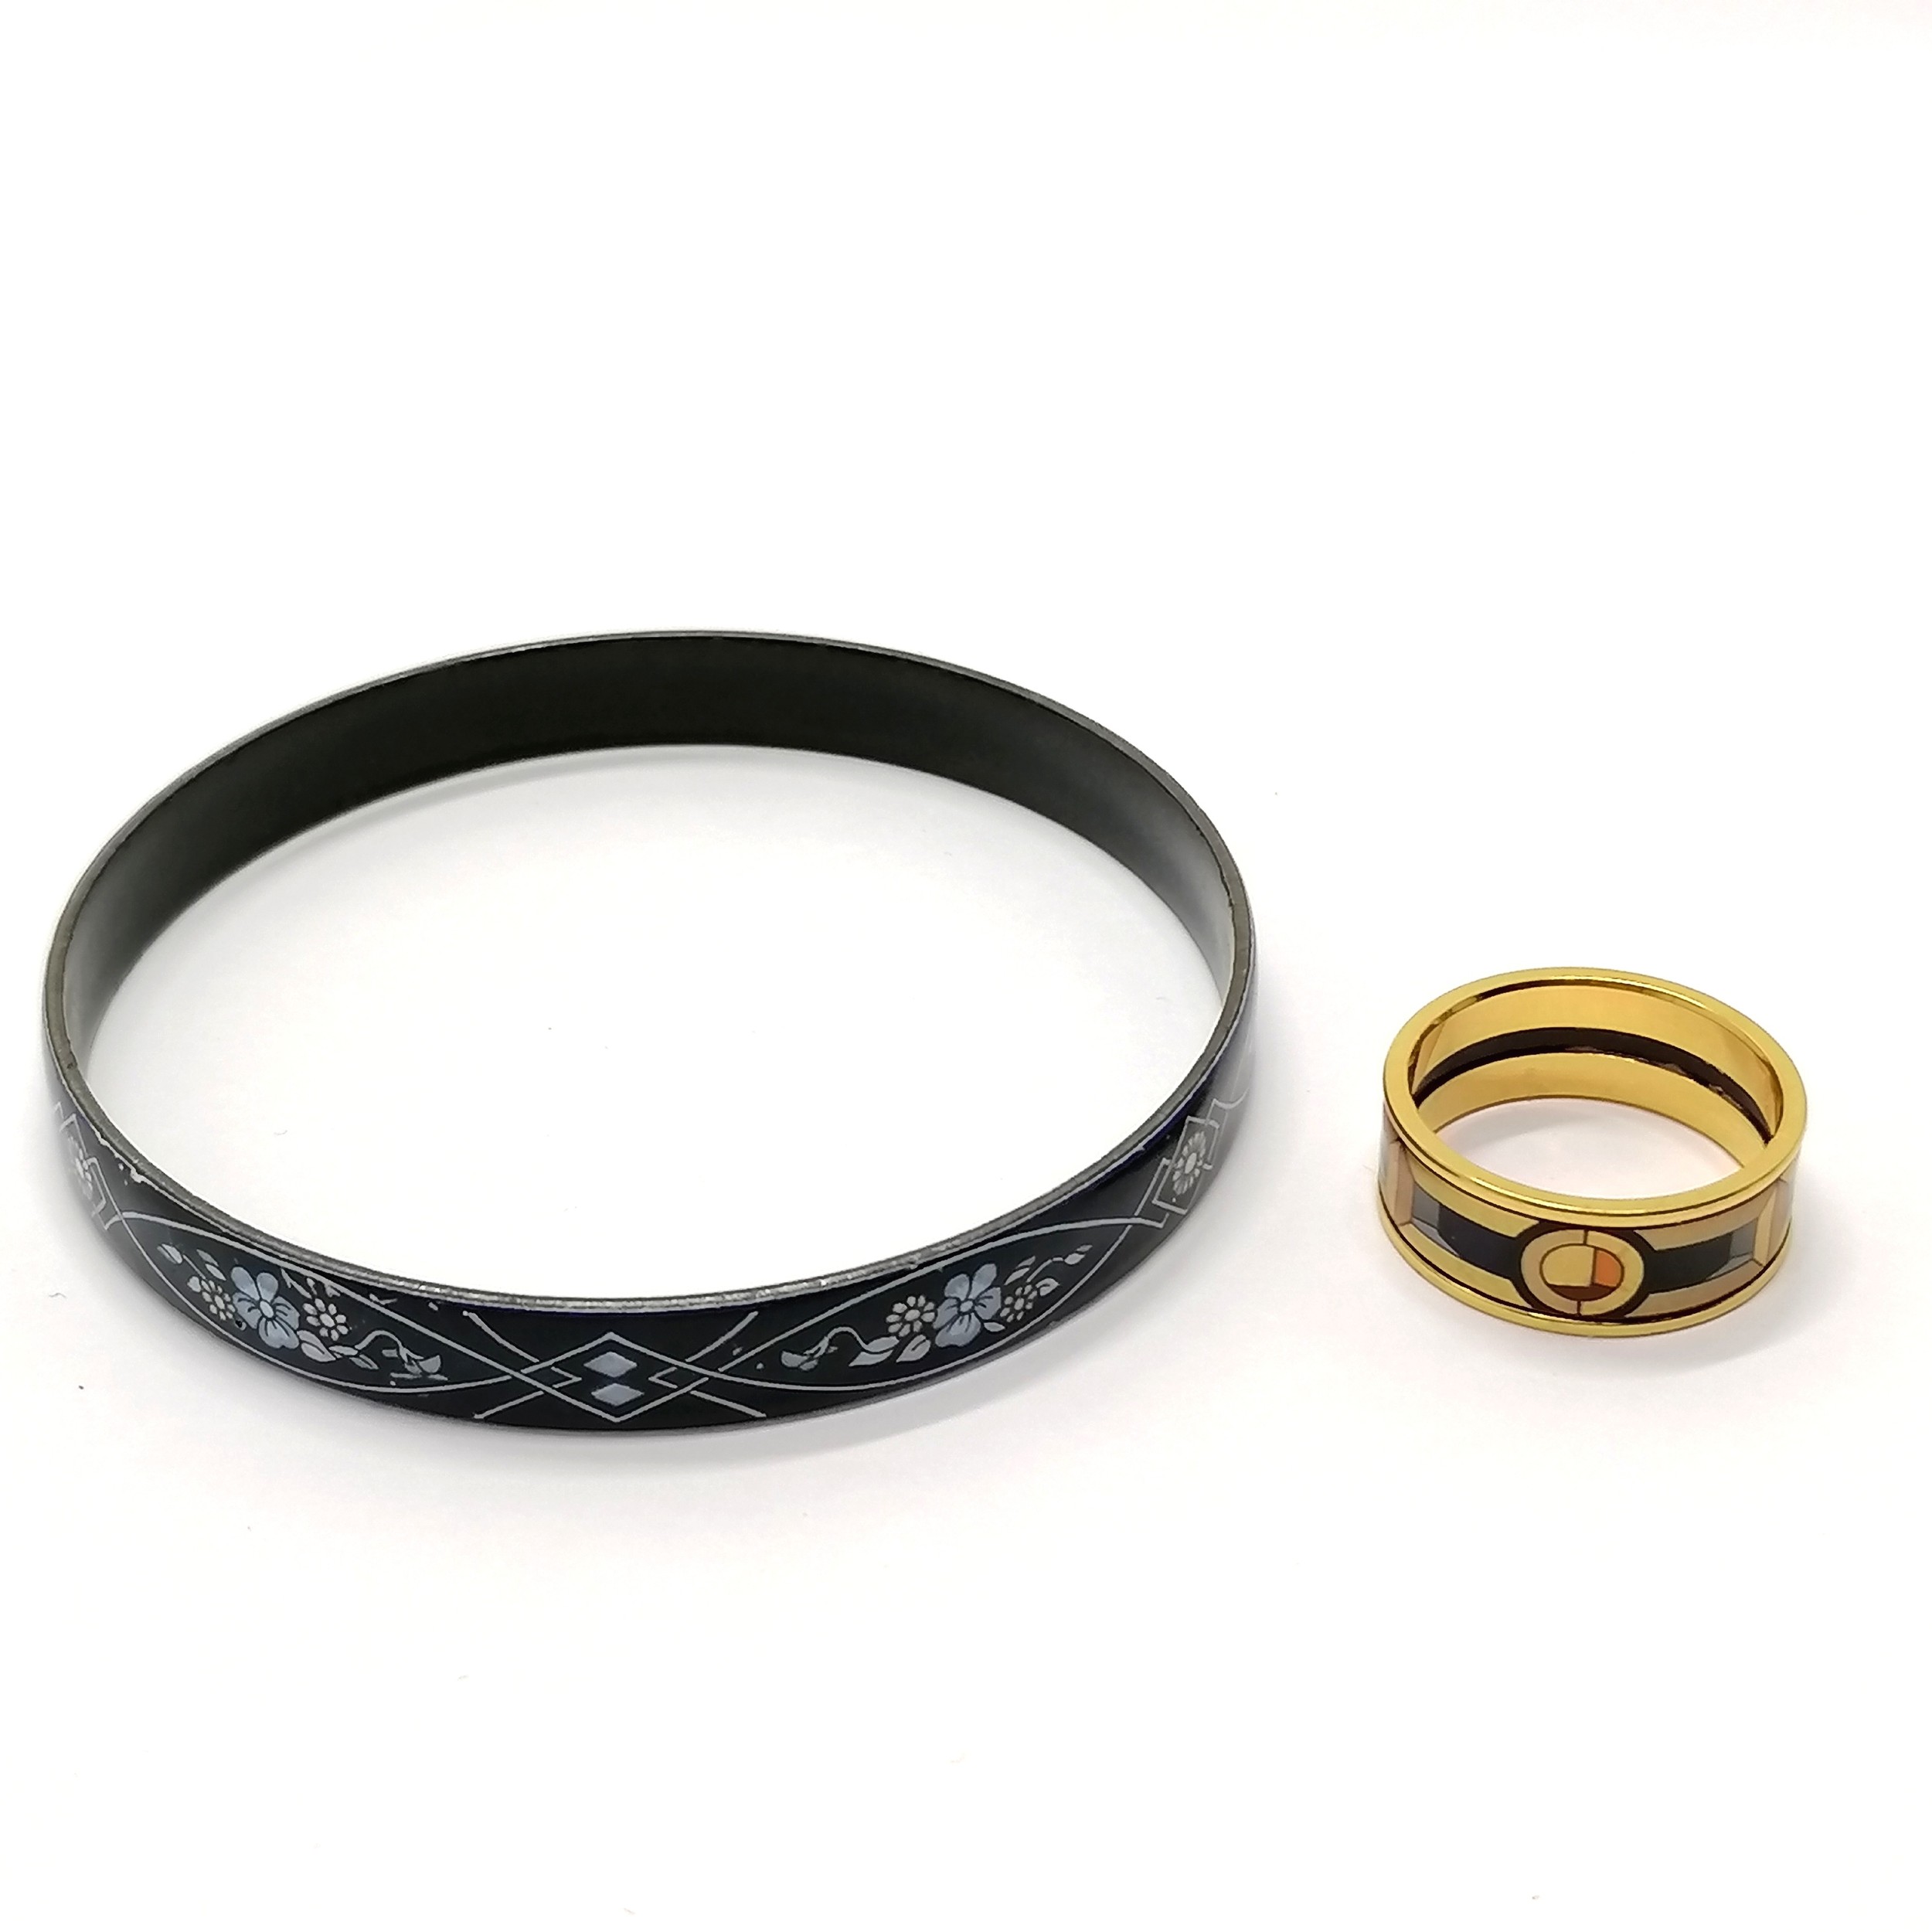 Michaela Frey ring + bangle - SOLD ON BEHALF OF THE NEW BREAST CANCER UNIT APPEAL YEOVIL HOSPITAL